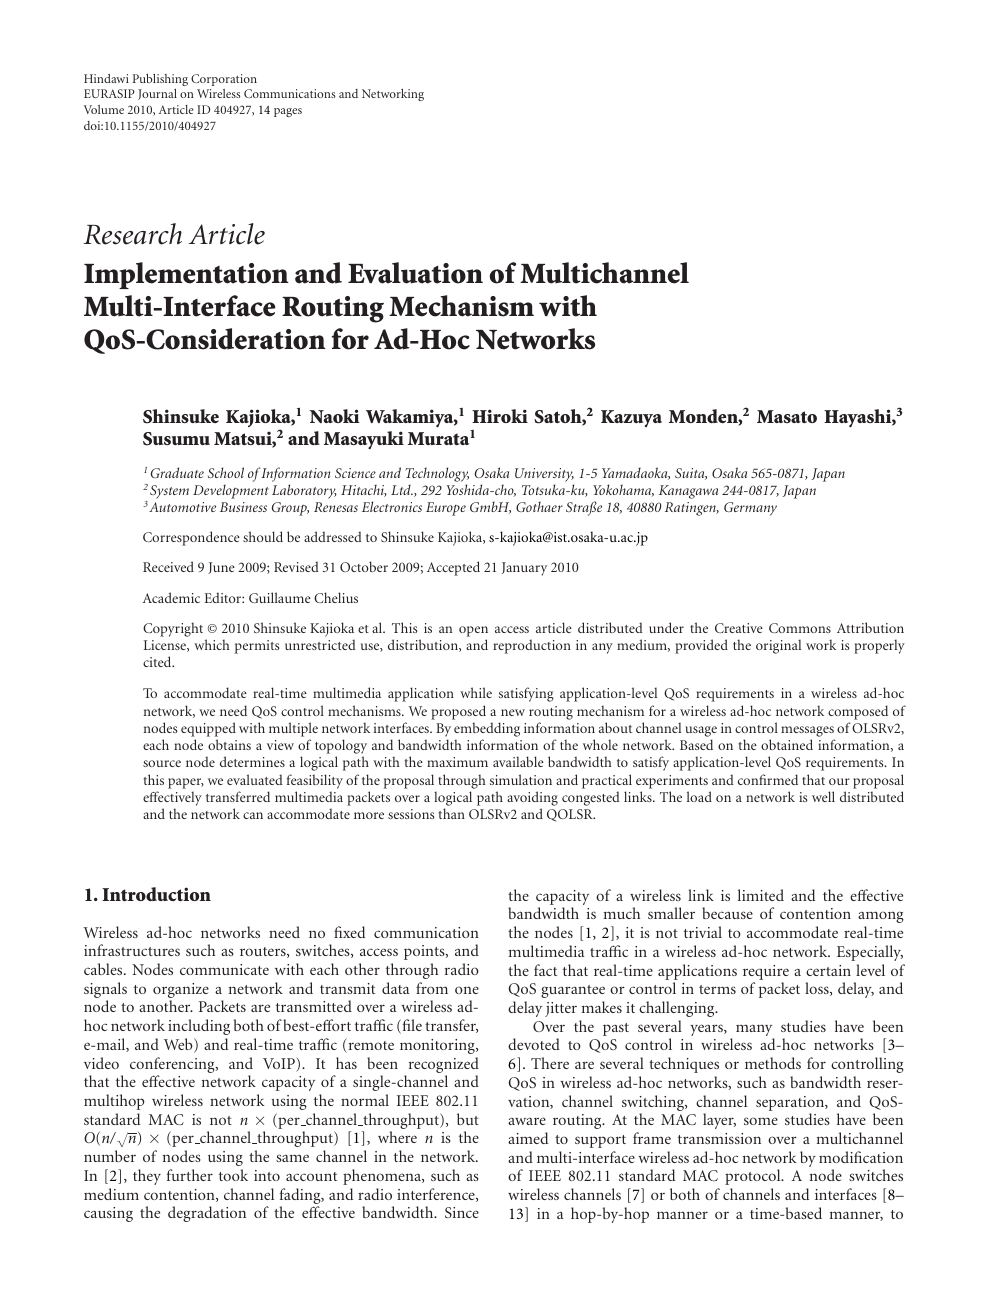 Implementation And Evaluation Of Multichannel Multi Interface Routing Mechanism With Qos Consideration For Ad Hoc Networks Topic Of Research Paper In Electrical Engineering Electronic Engineering Information Engineering Download Scholarly Article